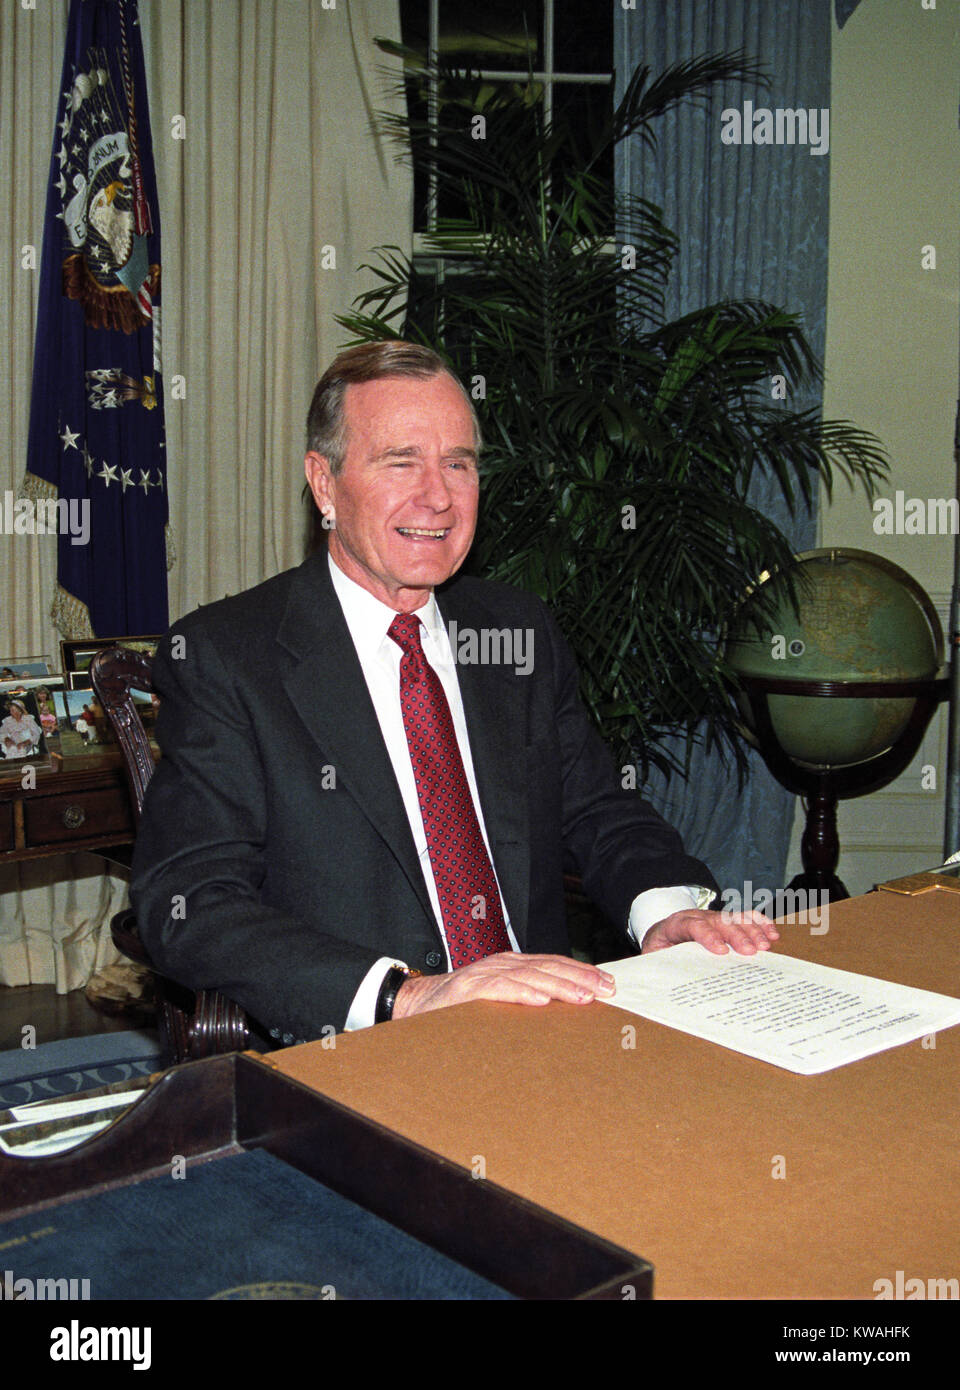 Washington, District of Columbia, USA. 25th Dec, 1991. United States President George H.W. Bush poses for photographers after delivering an address to the nation from the Oval Office of the White House in Washington, DC on Christmas Day, December 25, 1991 announcing the resignation of President Mikhail Gorbachev as President of the Union of Soviet Socialist Republics, marking the collapse of the Soviet Union and the end of the Cold War.Credit: Arnie Sachs /CNP Credit: Arnie Sachs/CNP/ZUMA Wire/Alamy Live News Stock Photo